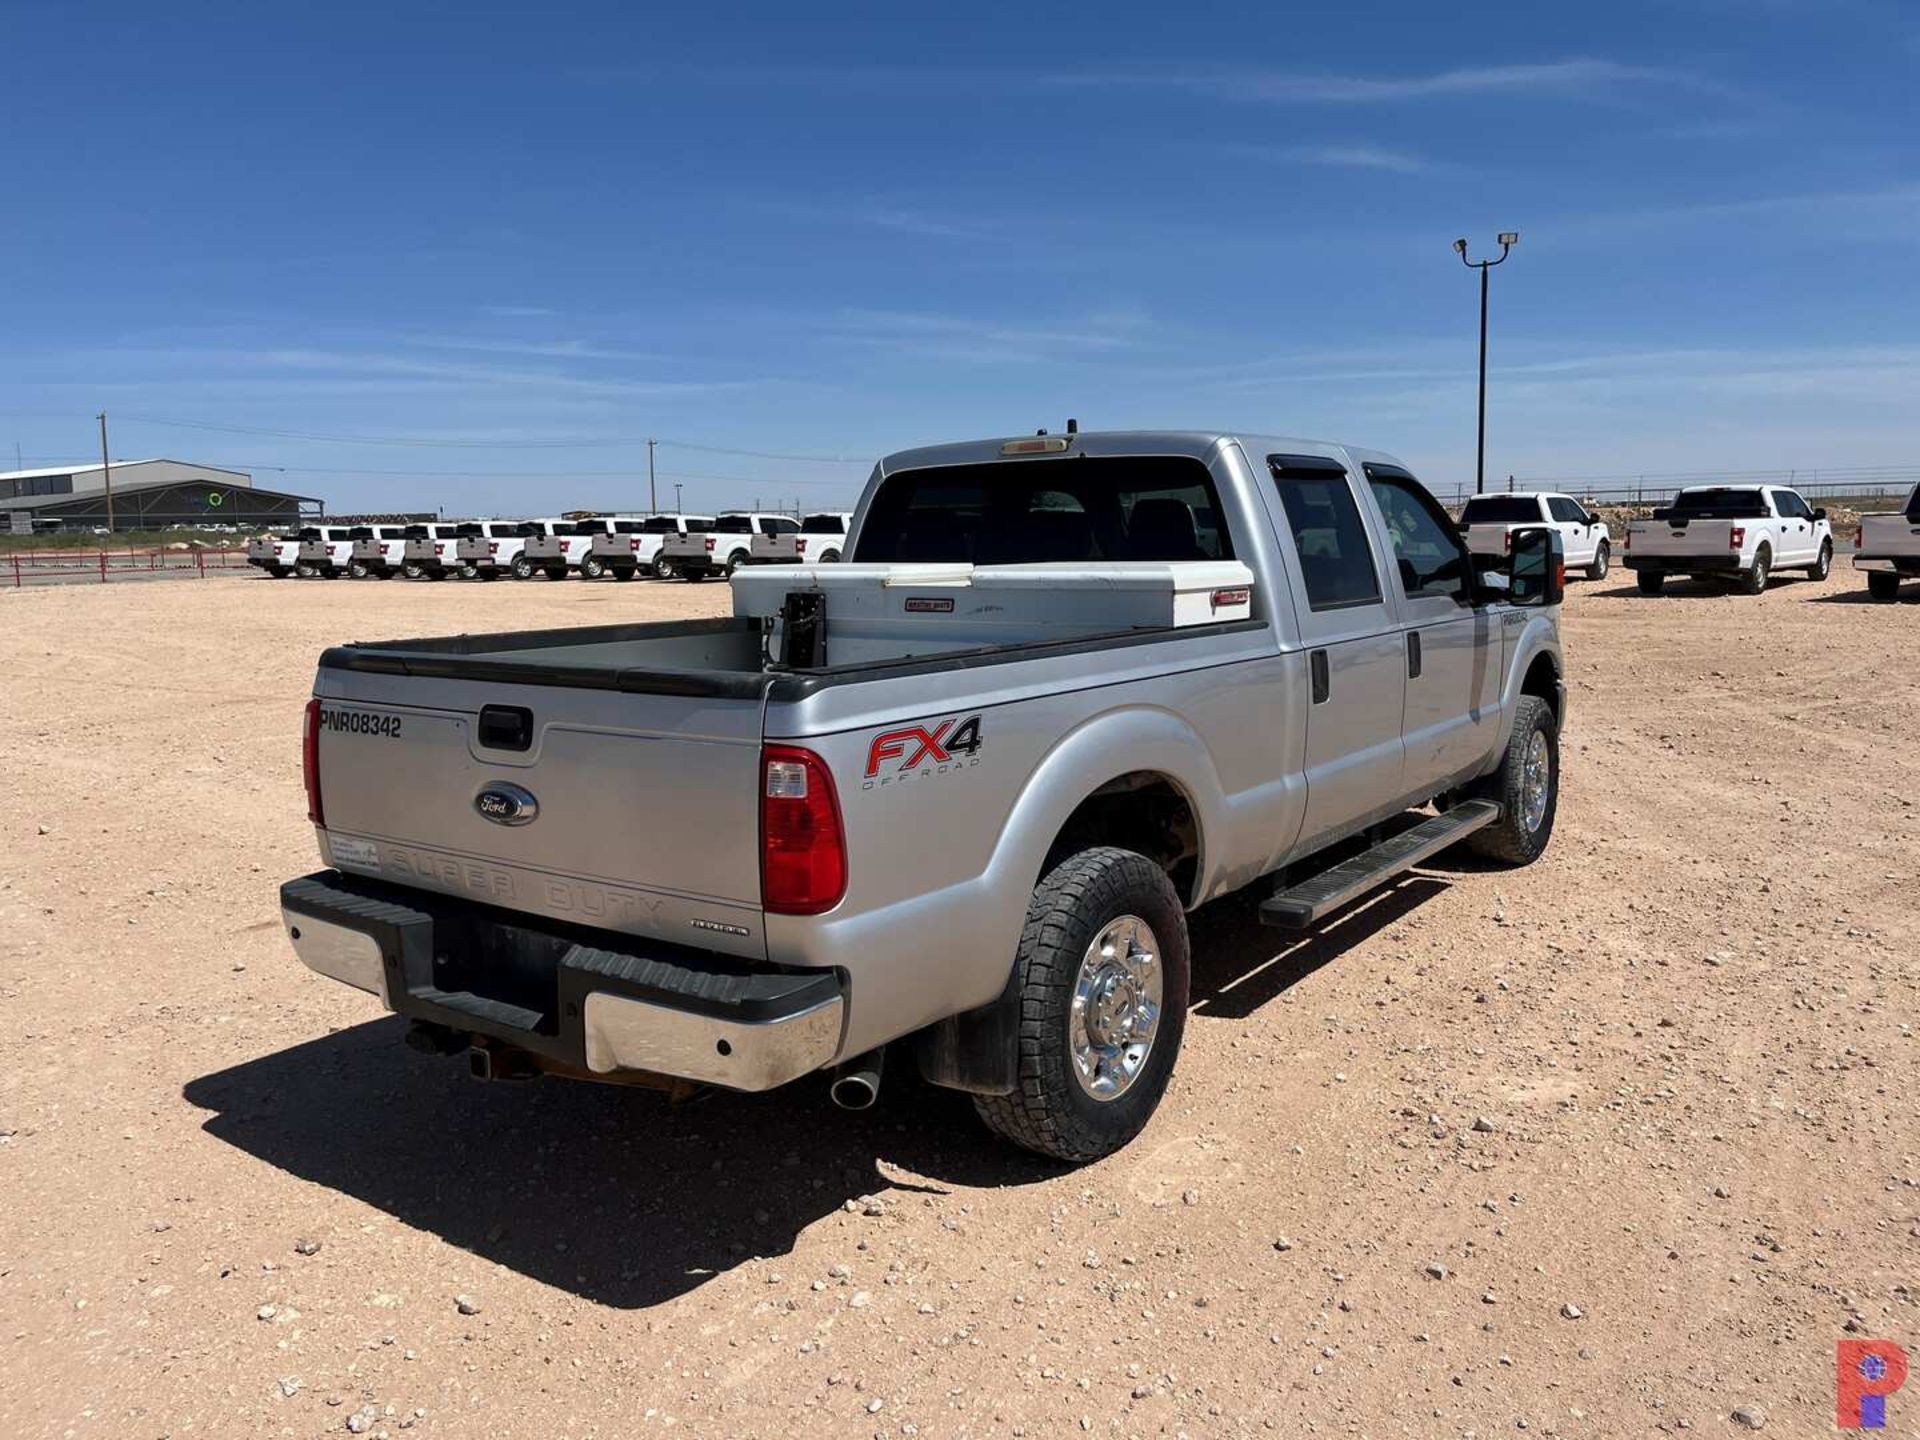 2015 FORD F-250 CREW CAB PICKUP TRUCK - Image 3 of 7